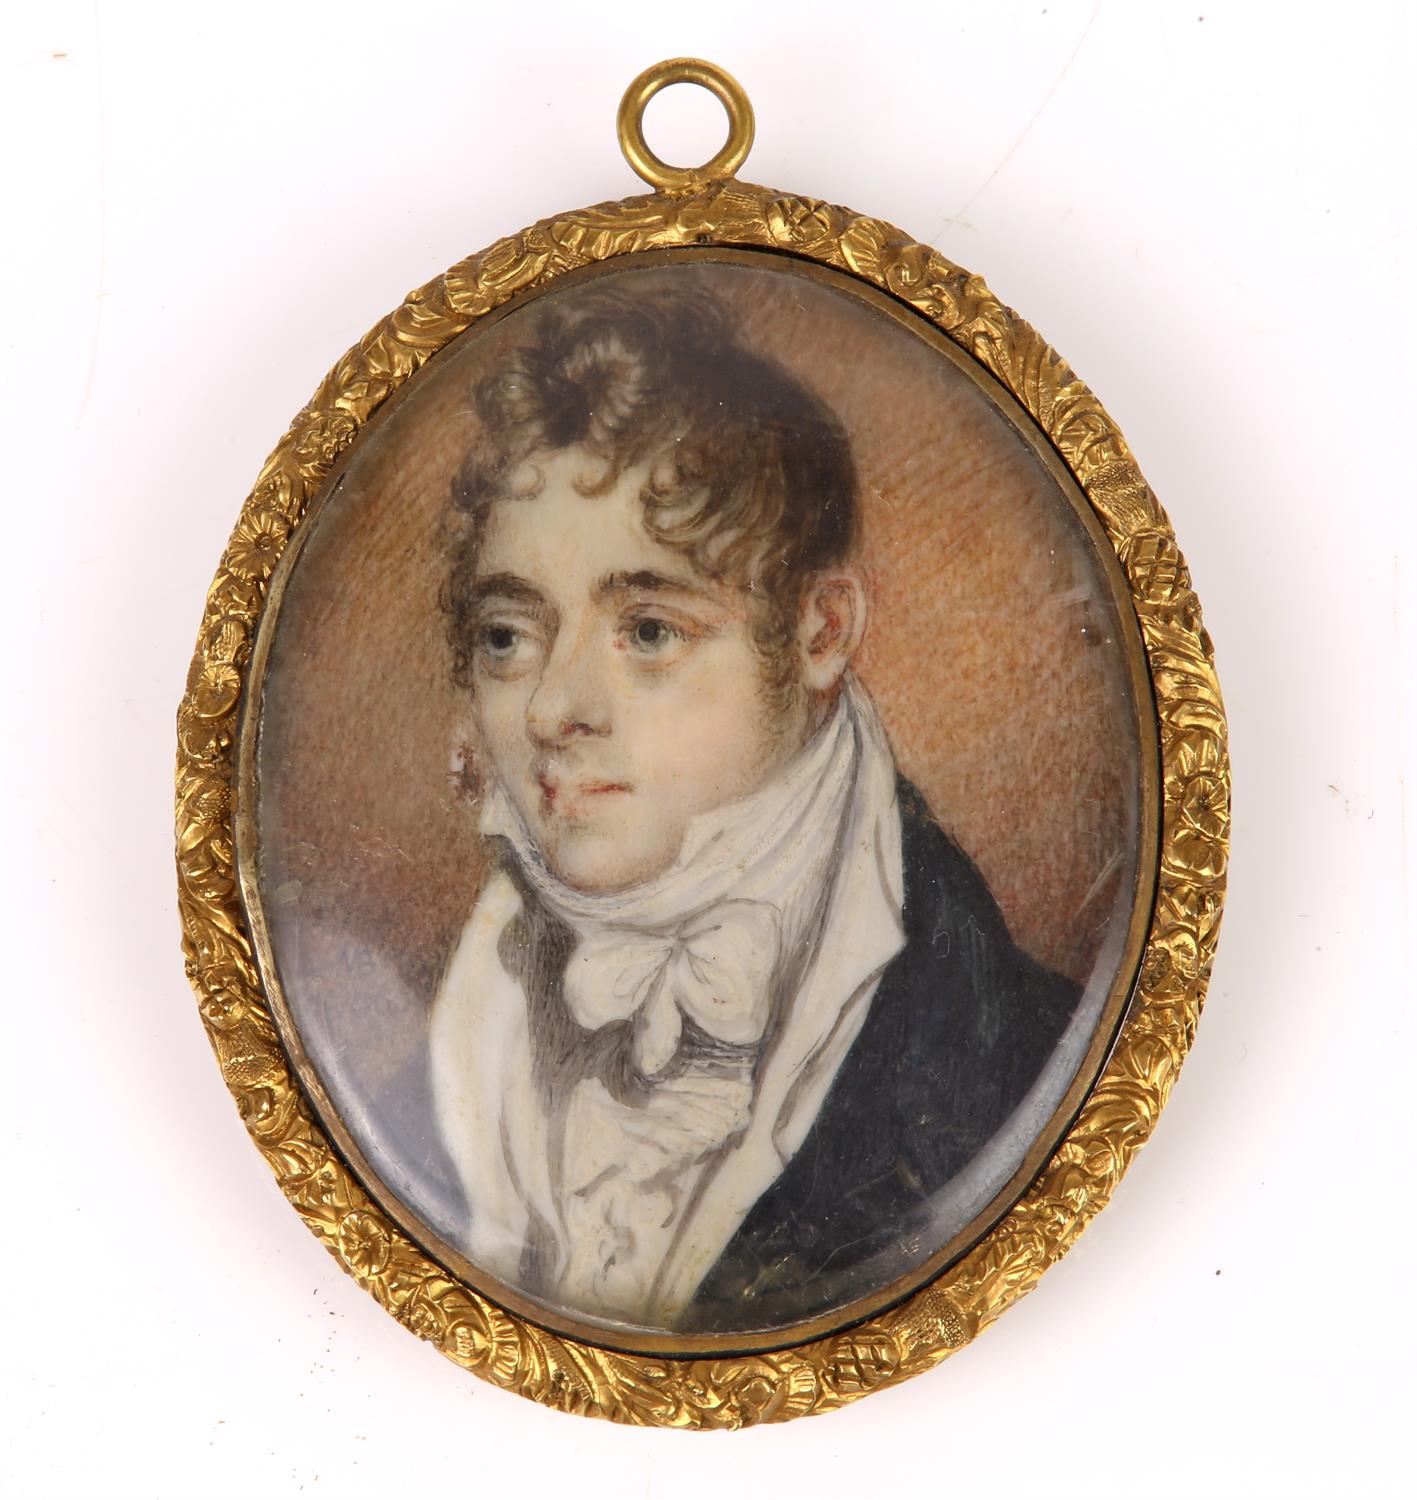 Oval miniature portrait of a Georgian gentleman signed with the initials, N B and dated 1806